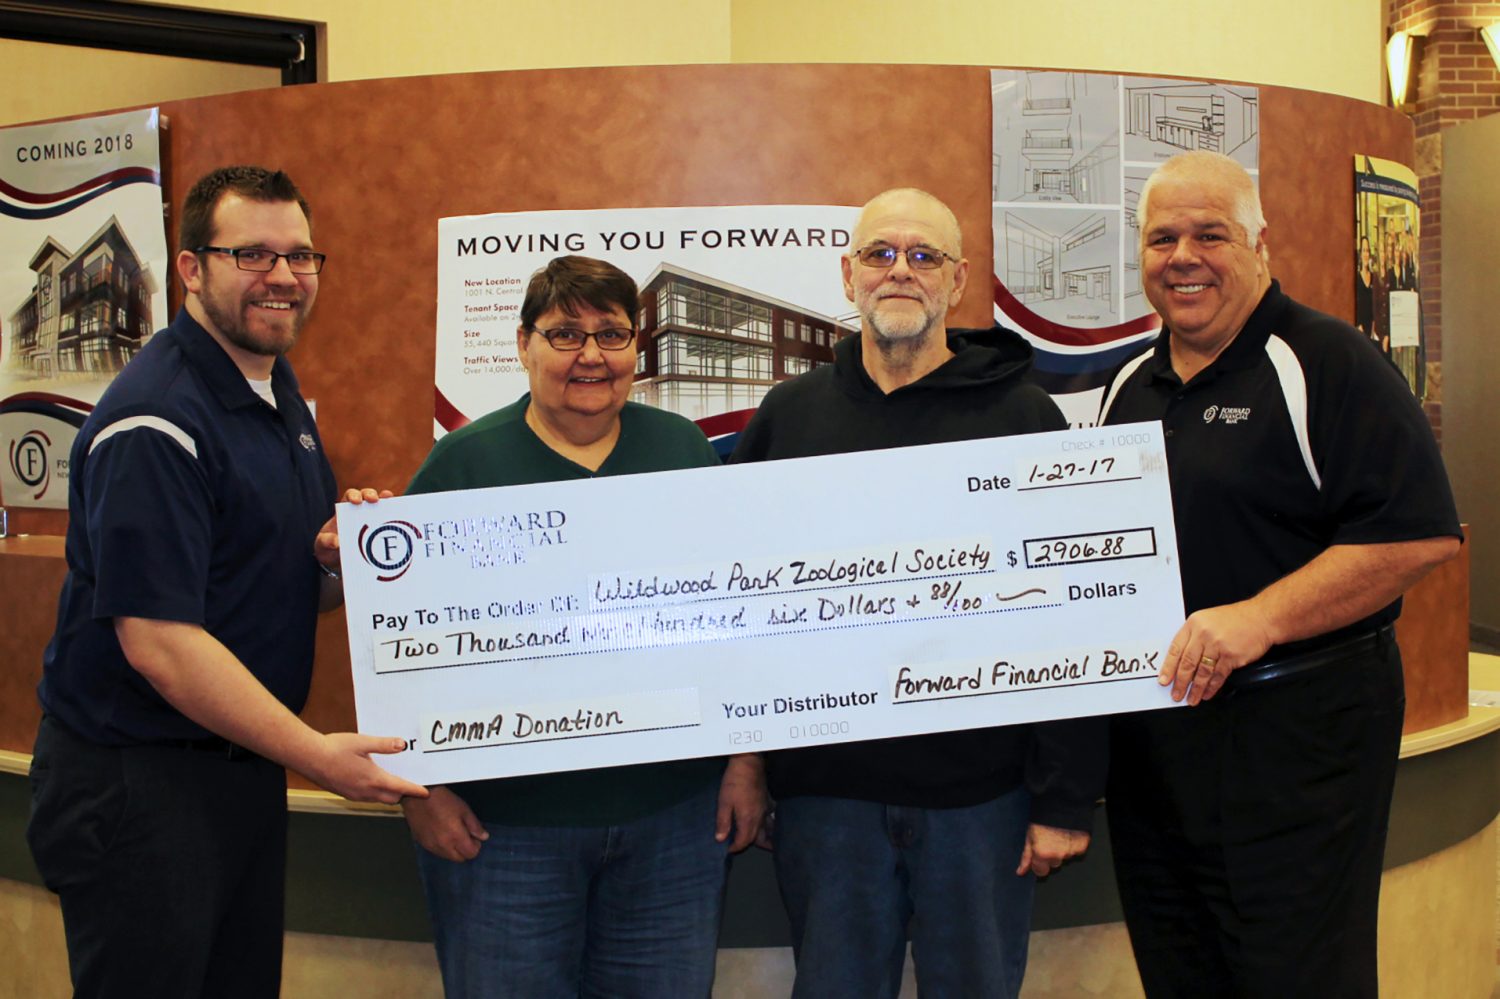 Personal Banker Chris Damerell (far left) and Mortgage Lender Bob McManus (far right) present a check from Forward Financial Bank to the Wildwood Zoological Society, represented by Mary Wilson and Tom Buttke.